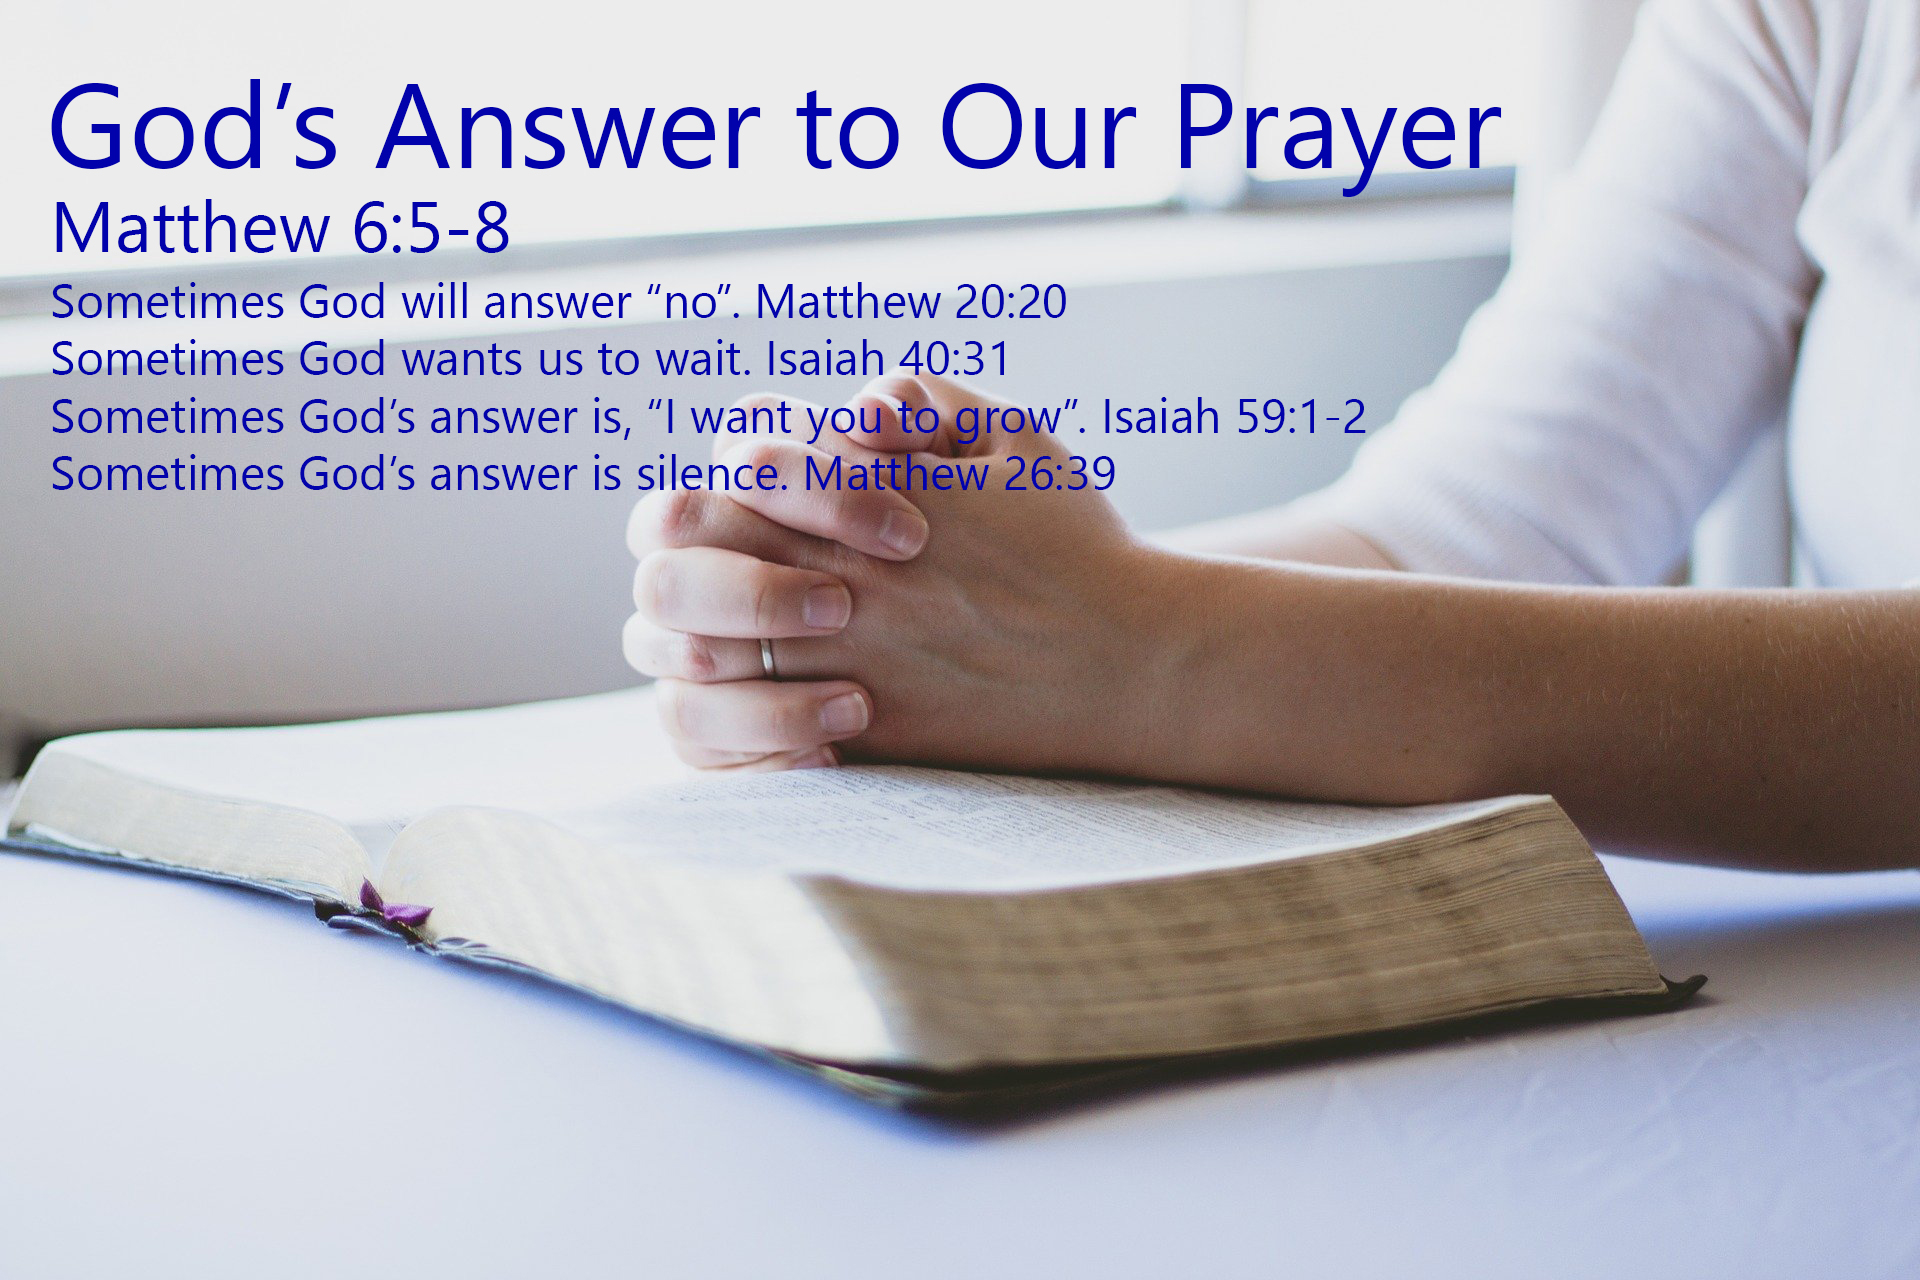 God’s Answer to Our Prayer